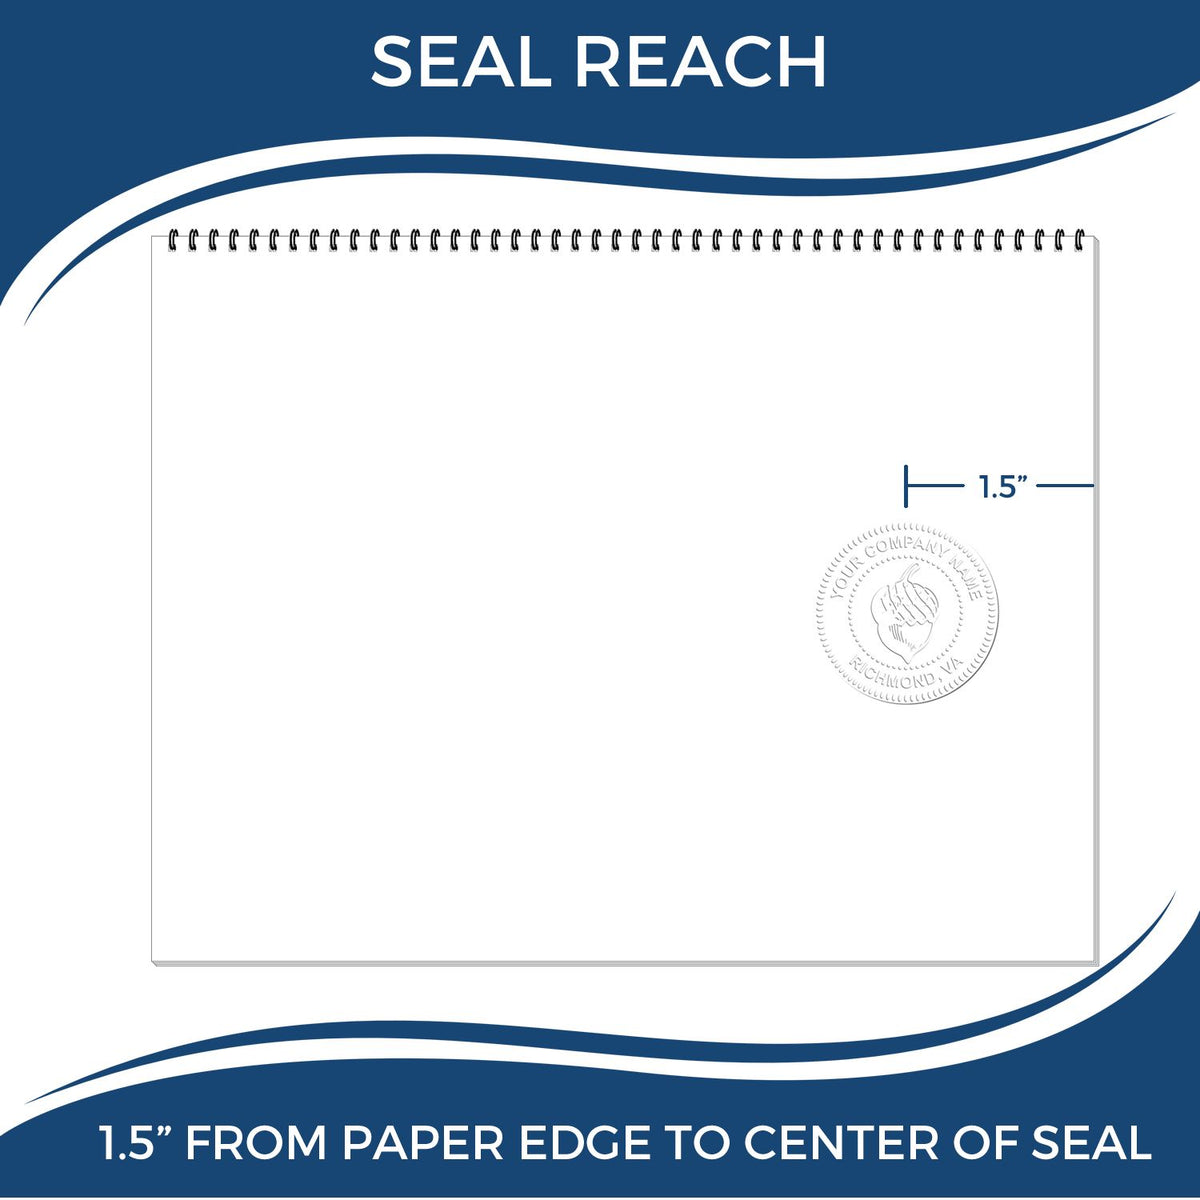 An infographic showing the seal reach which is represented by a ruler and a miniature seal image of the Soft Virginia Professional Engineer Seal